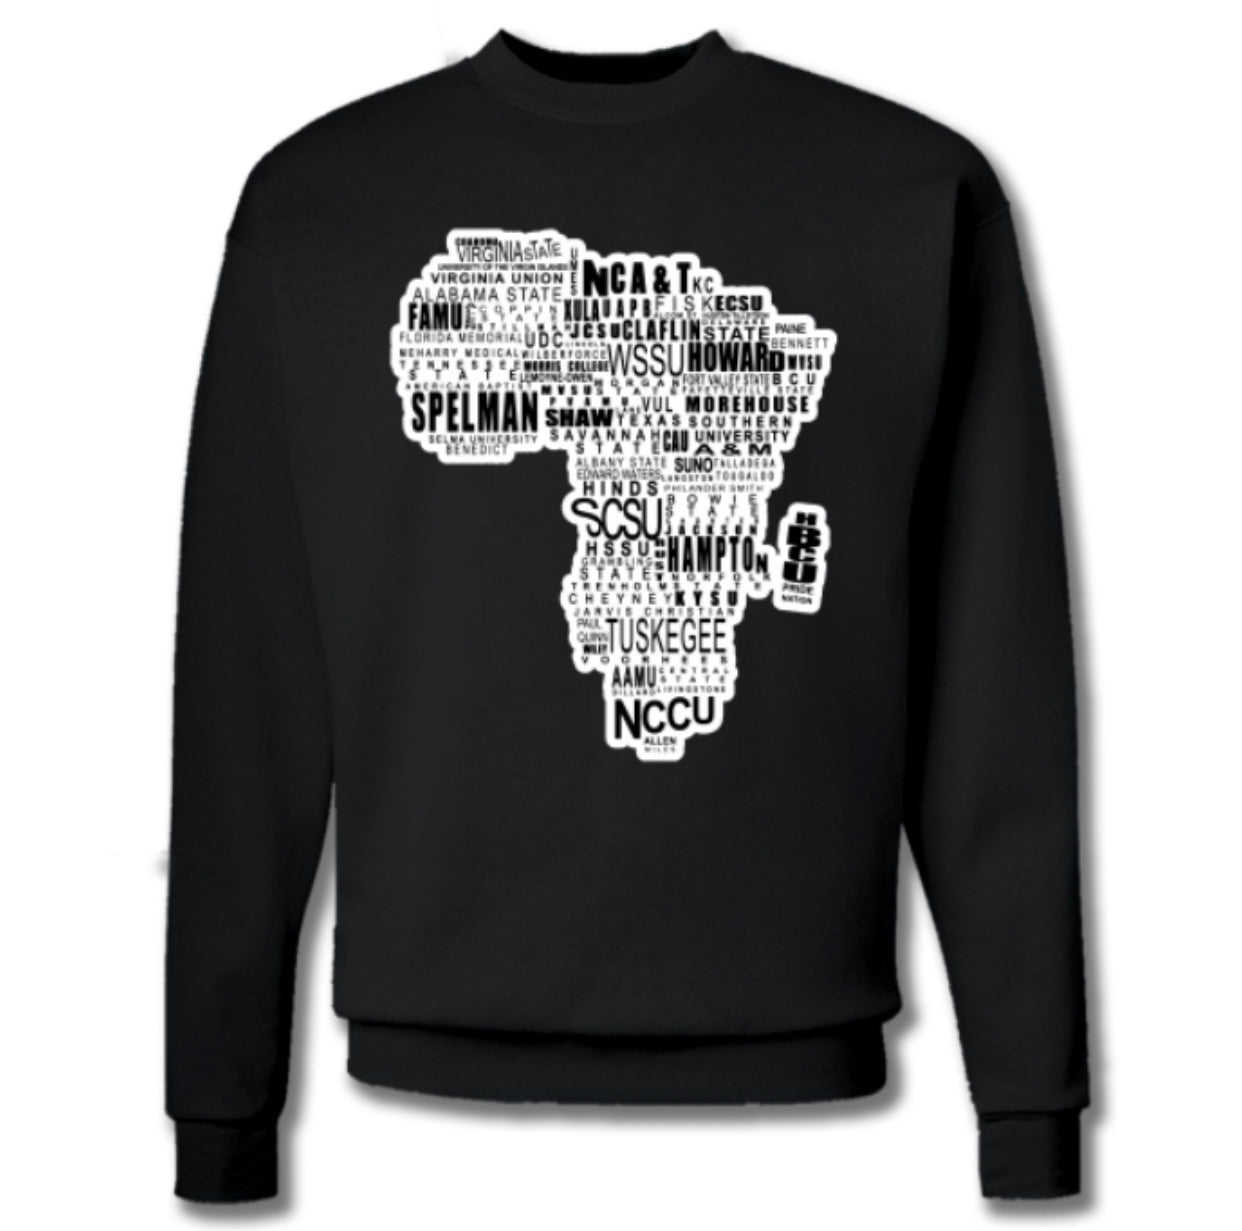 The “Homecoming” Crewneck Sweater in Black and White